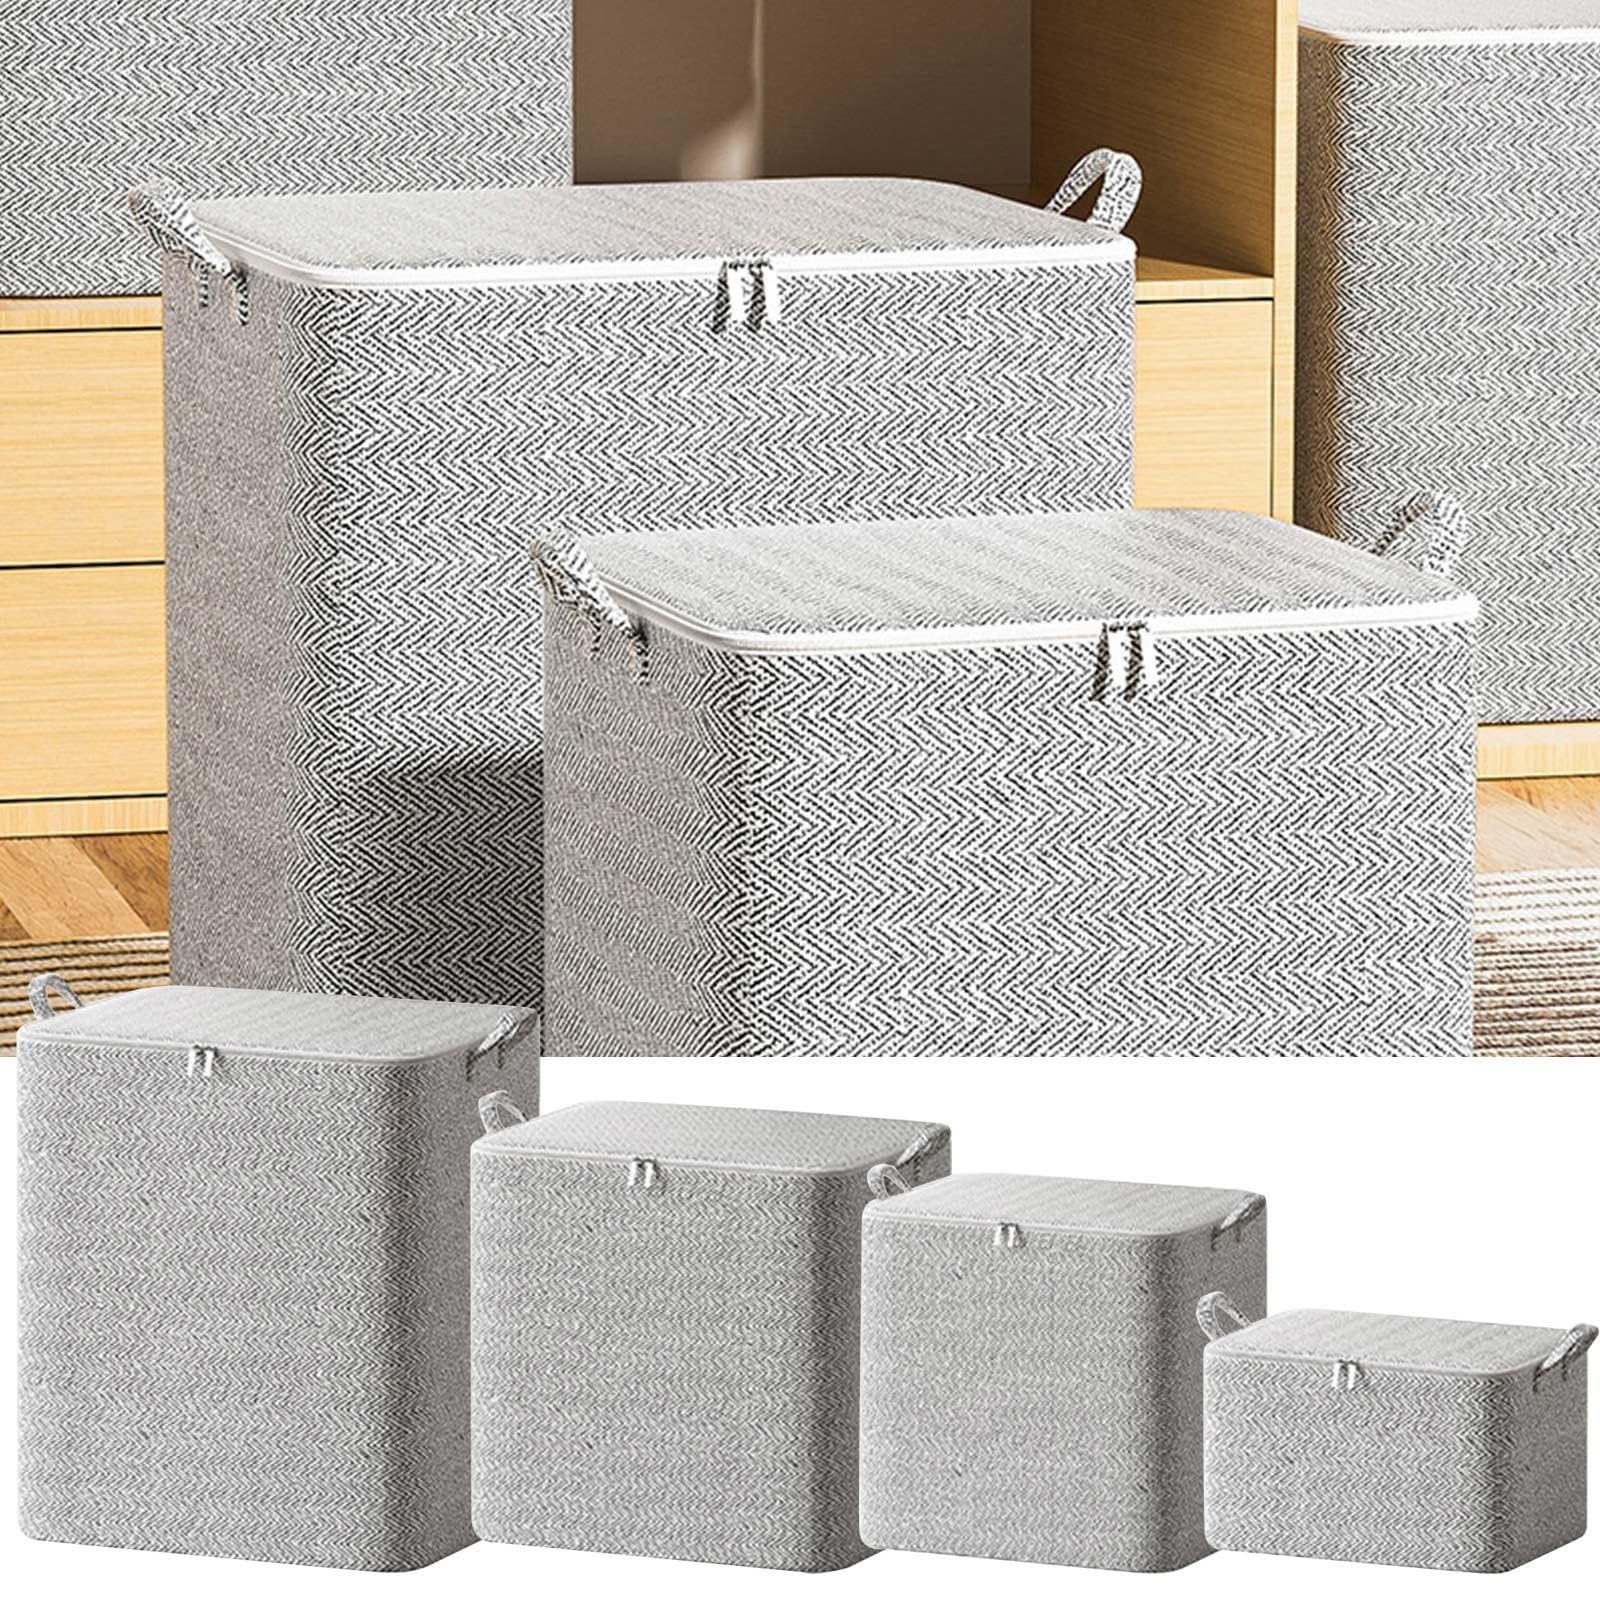 Household Foldable Storage Bags, Portable Non Woven Zipper Storage Box, Seasonal Clothes Storage Bins, Stackable Closet Organizer Storage Containers with Handle, 1PC Wardrobe Sorting Storage Box